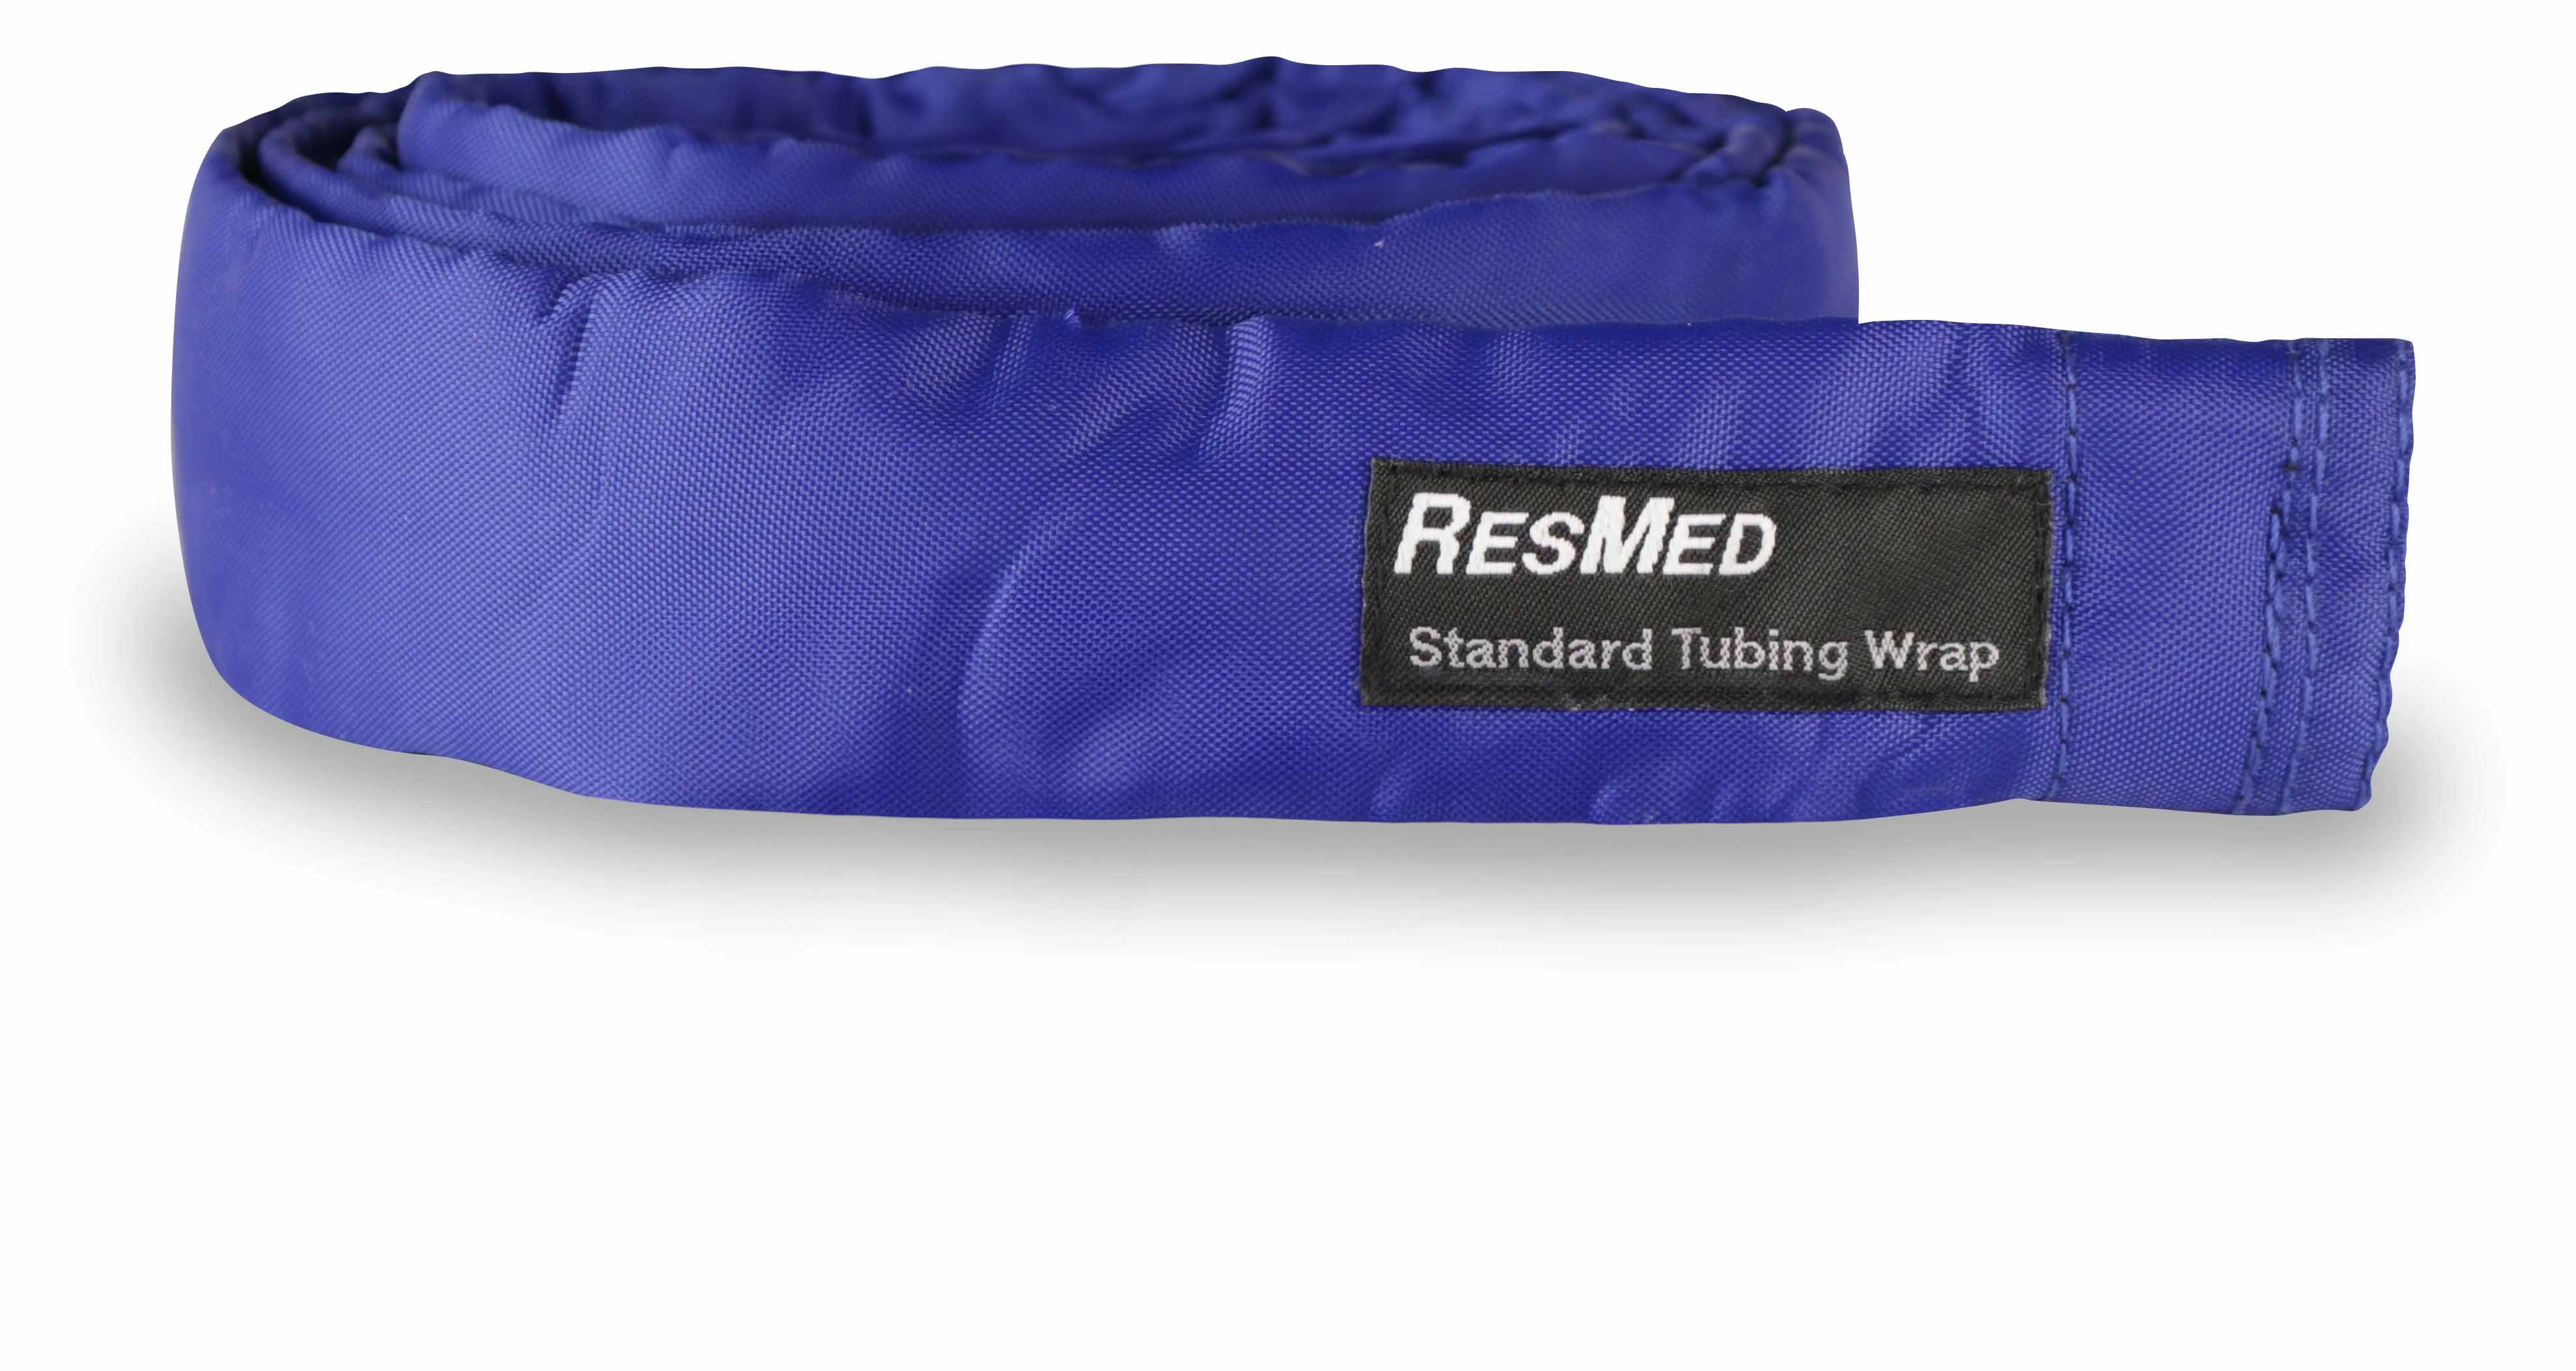 https://images.cpap.com/products/resmed/33963/resmed-zippered-tubing-wrap-coiled-cpapdotcom.jpg?auto=webp&format=jpg